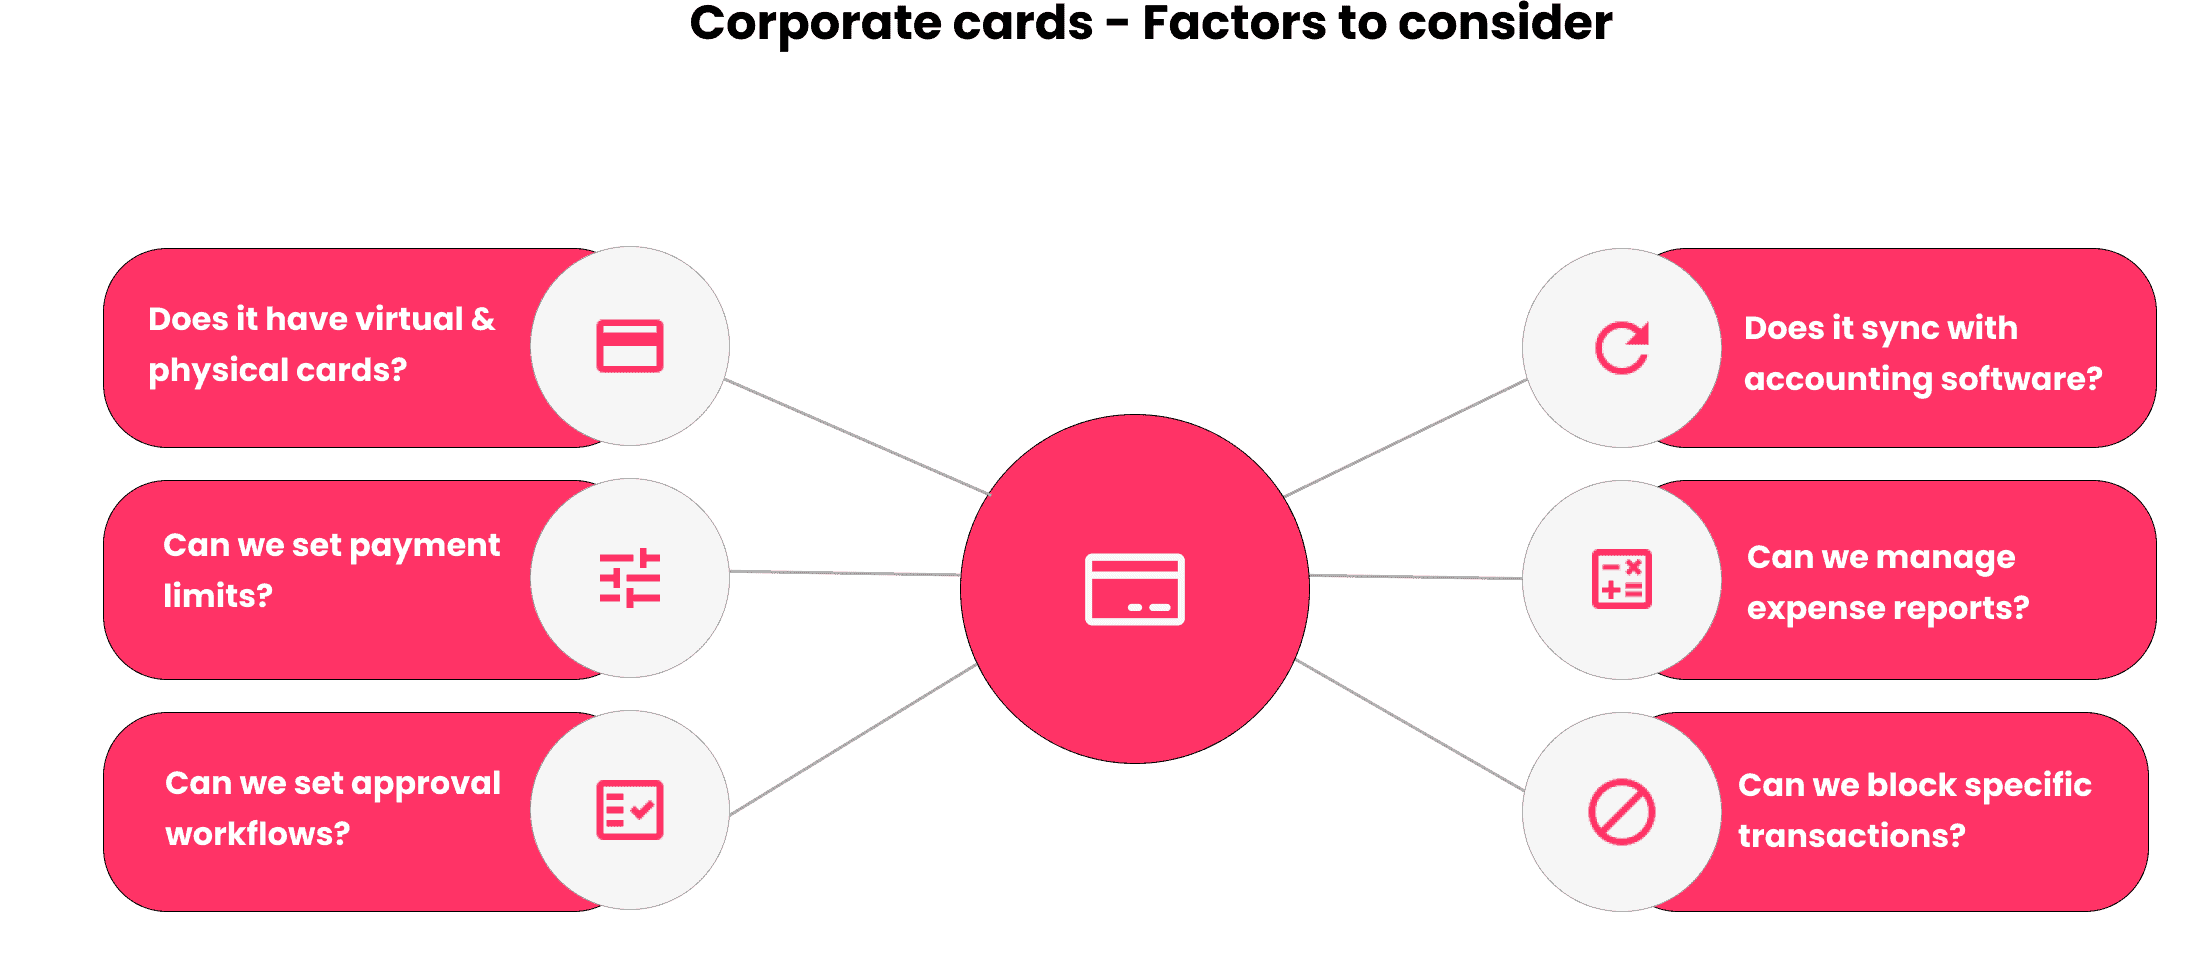 Corporate cards - Factors to consider